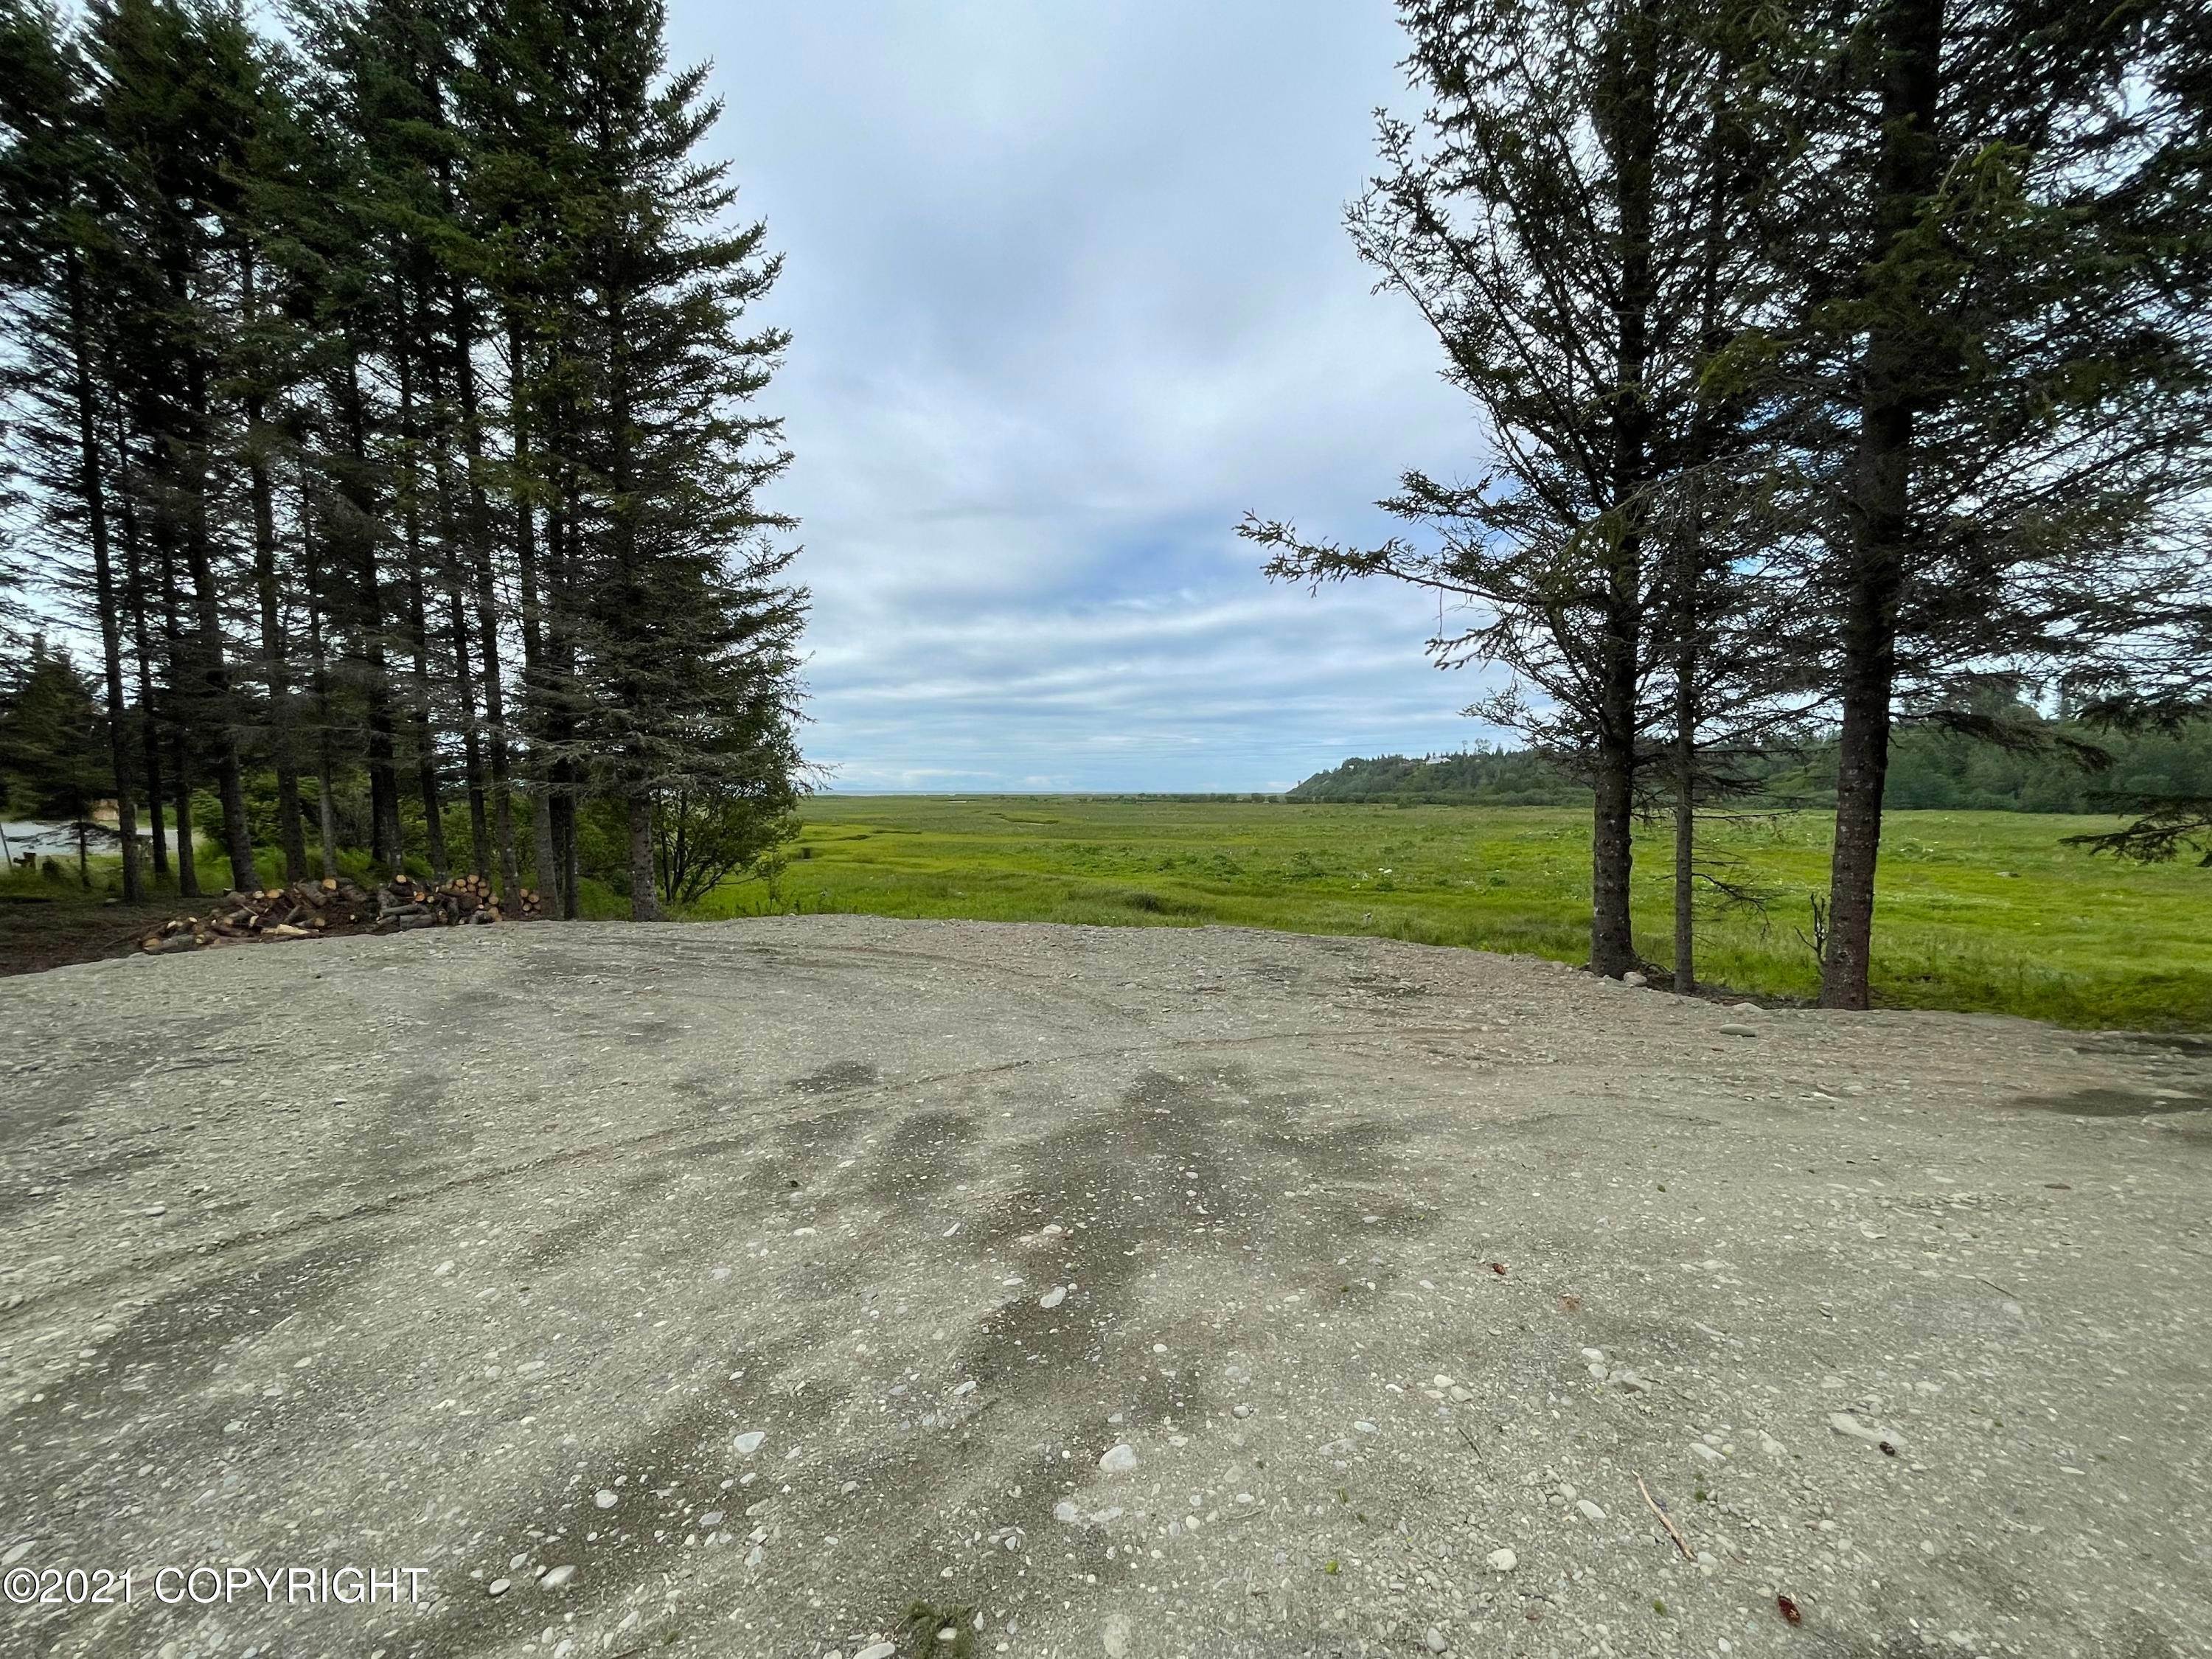 8. Land for Sale at Anchor Point (Beach) Road Anchor Point, Alaska 99556 United States